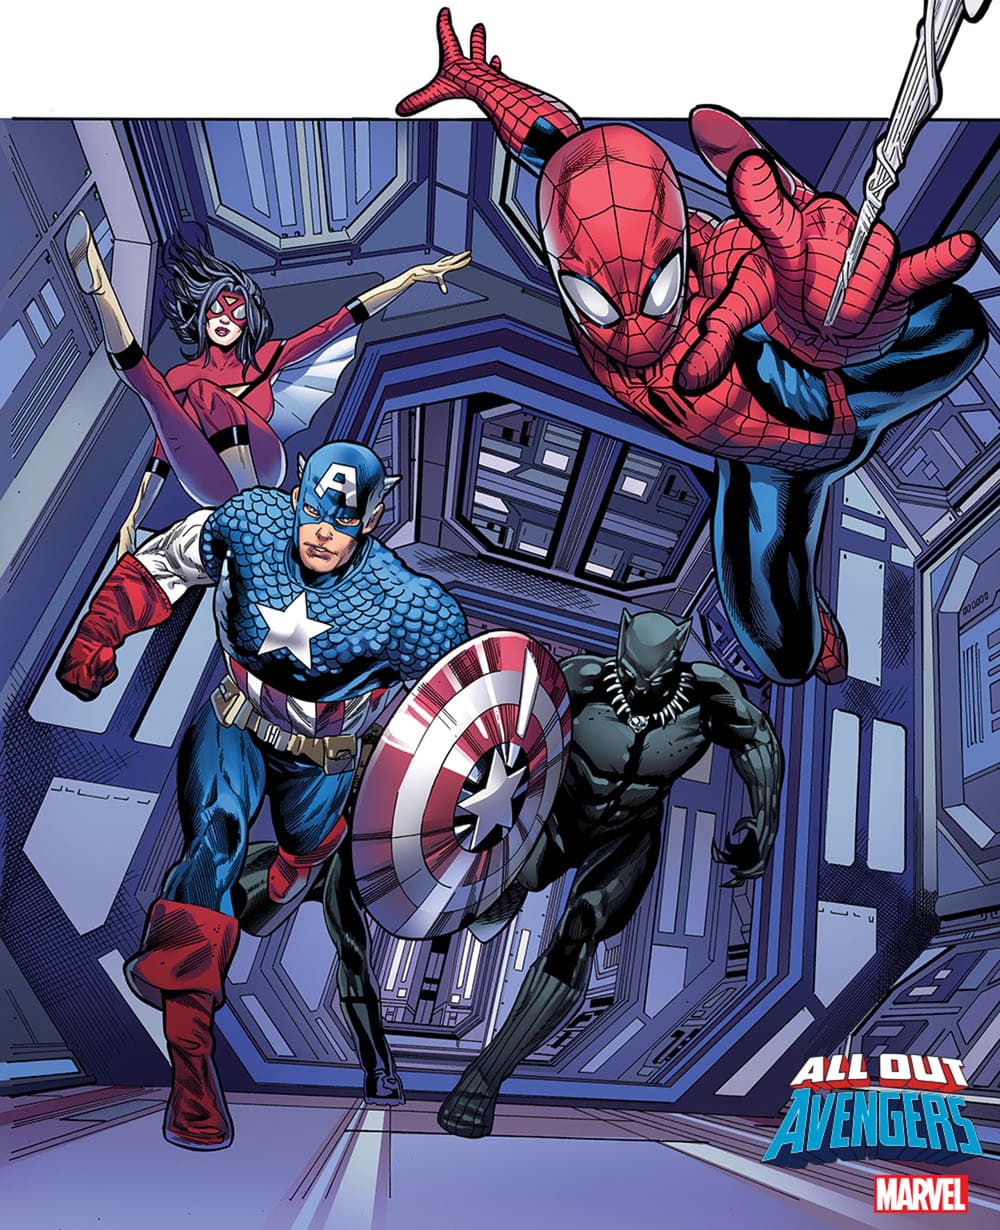 All-Out Avengers #1 interior artwork by Greg Land